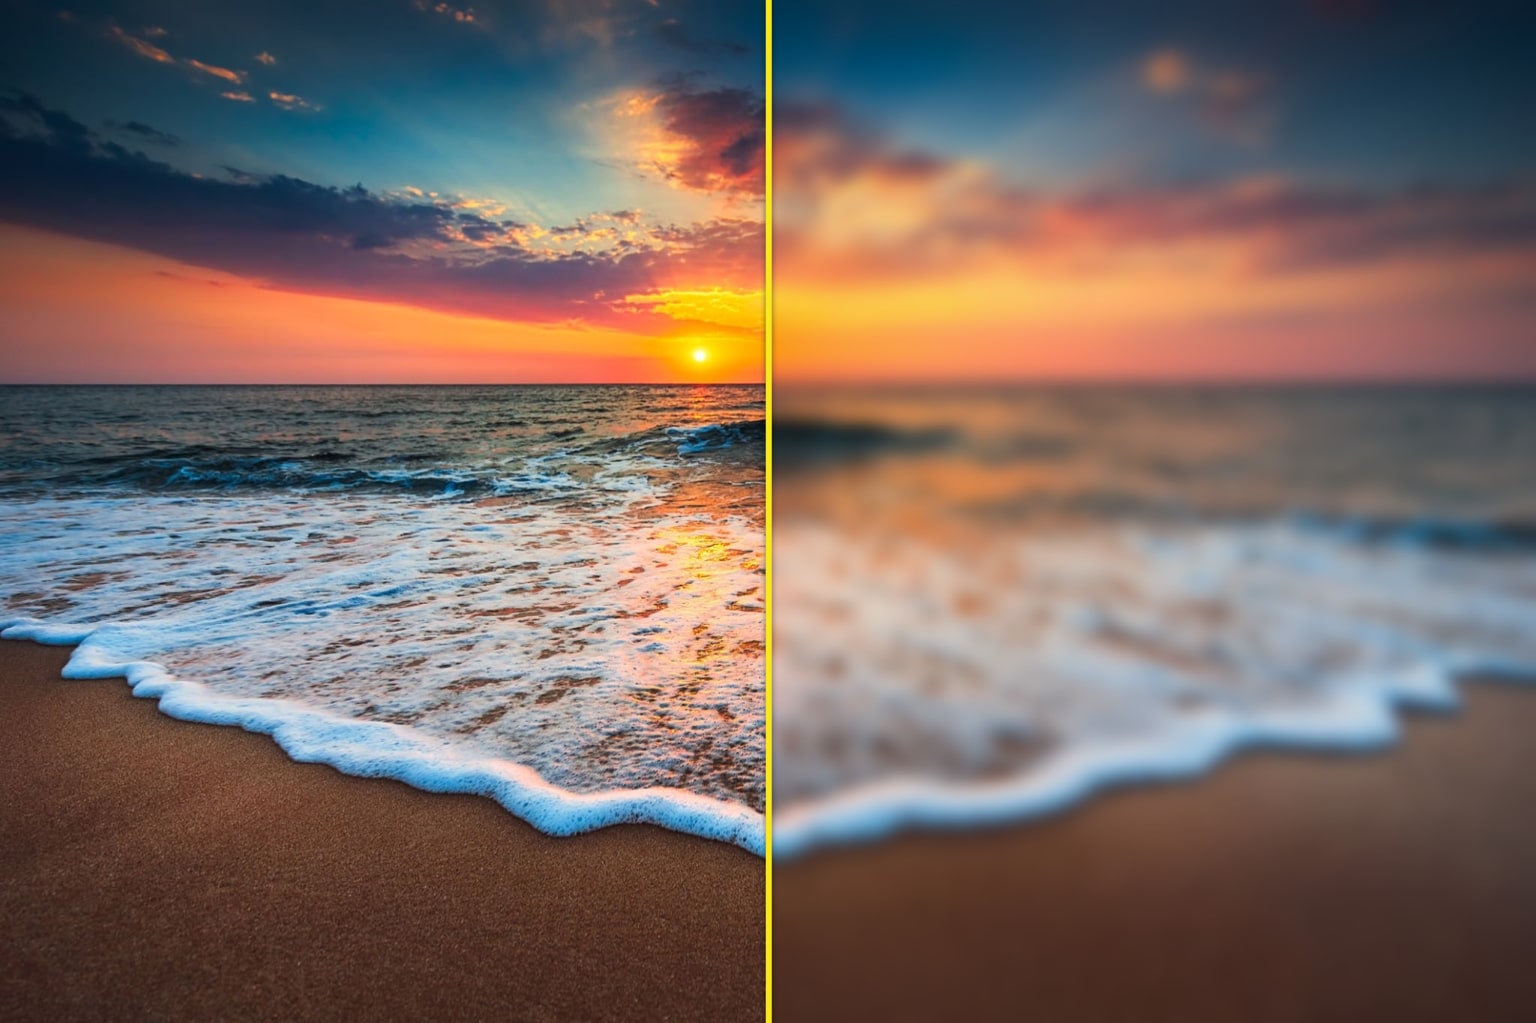 The Impact of Resizing an Image on its Quality - Things to Consider When Resizing